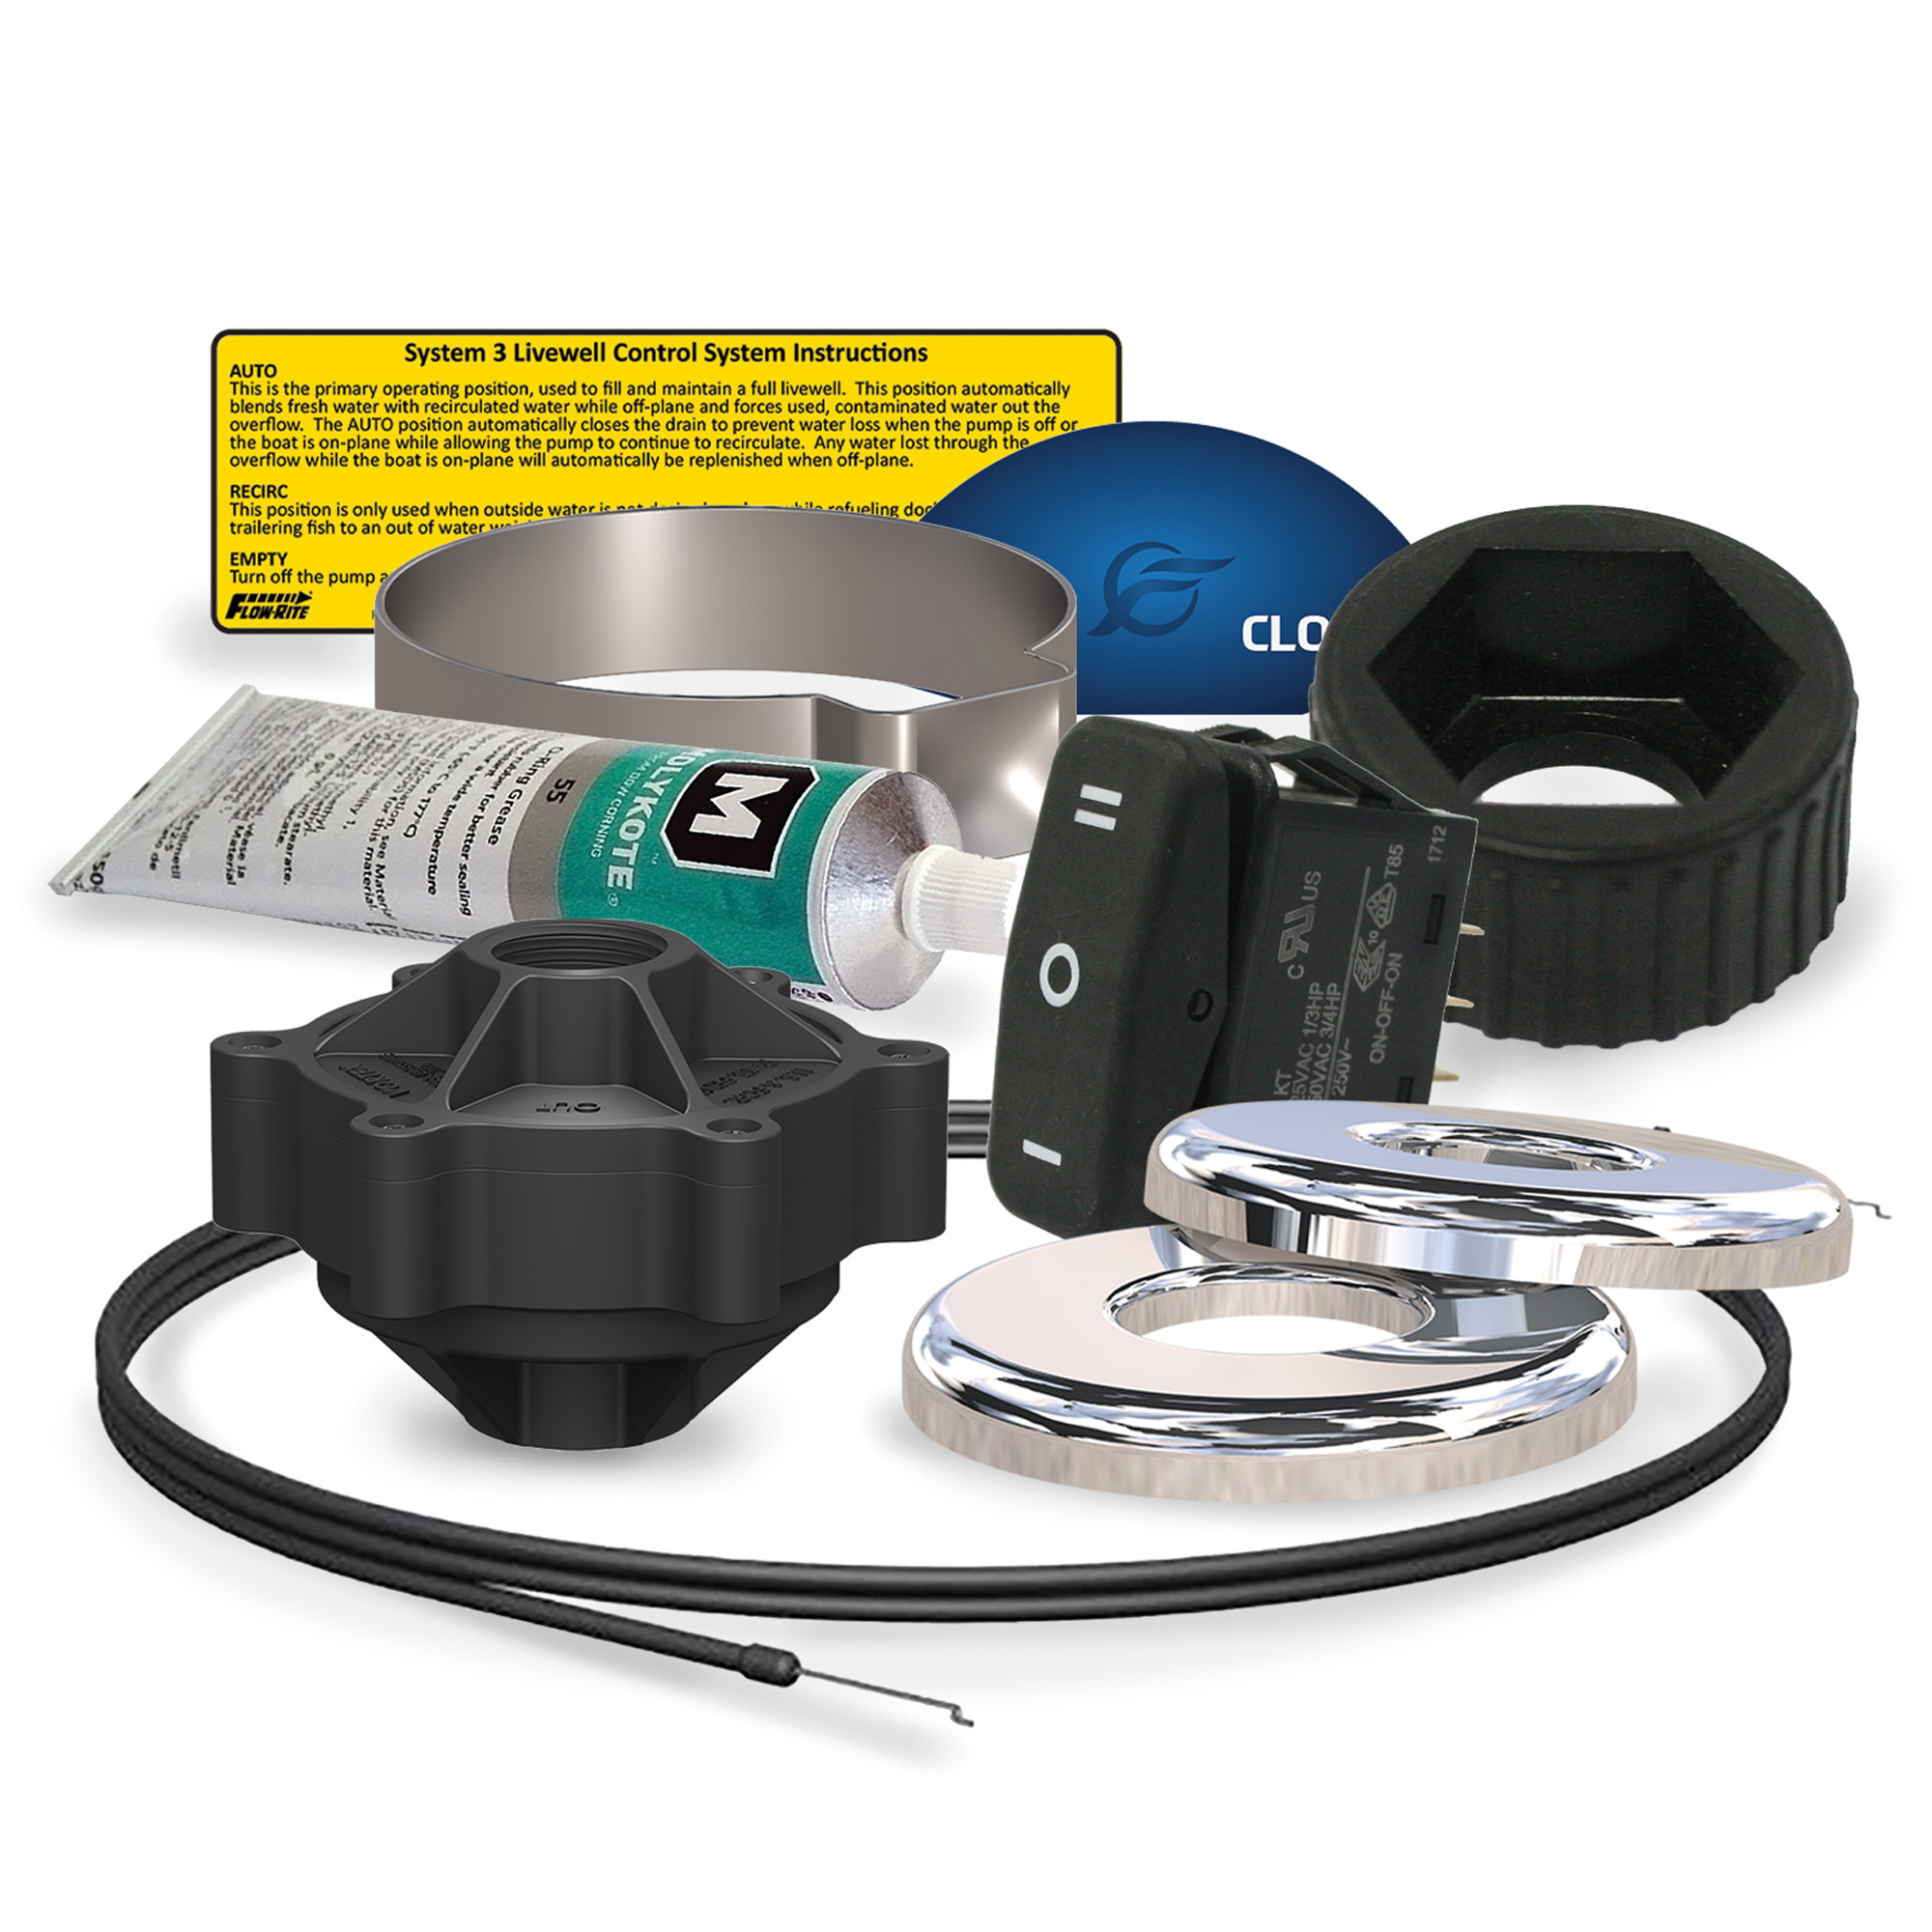 Product category - Accessories / Parts / Repair Kit